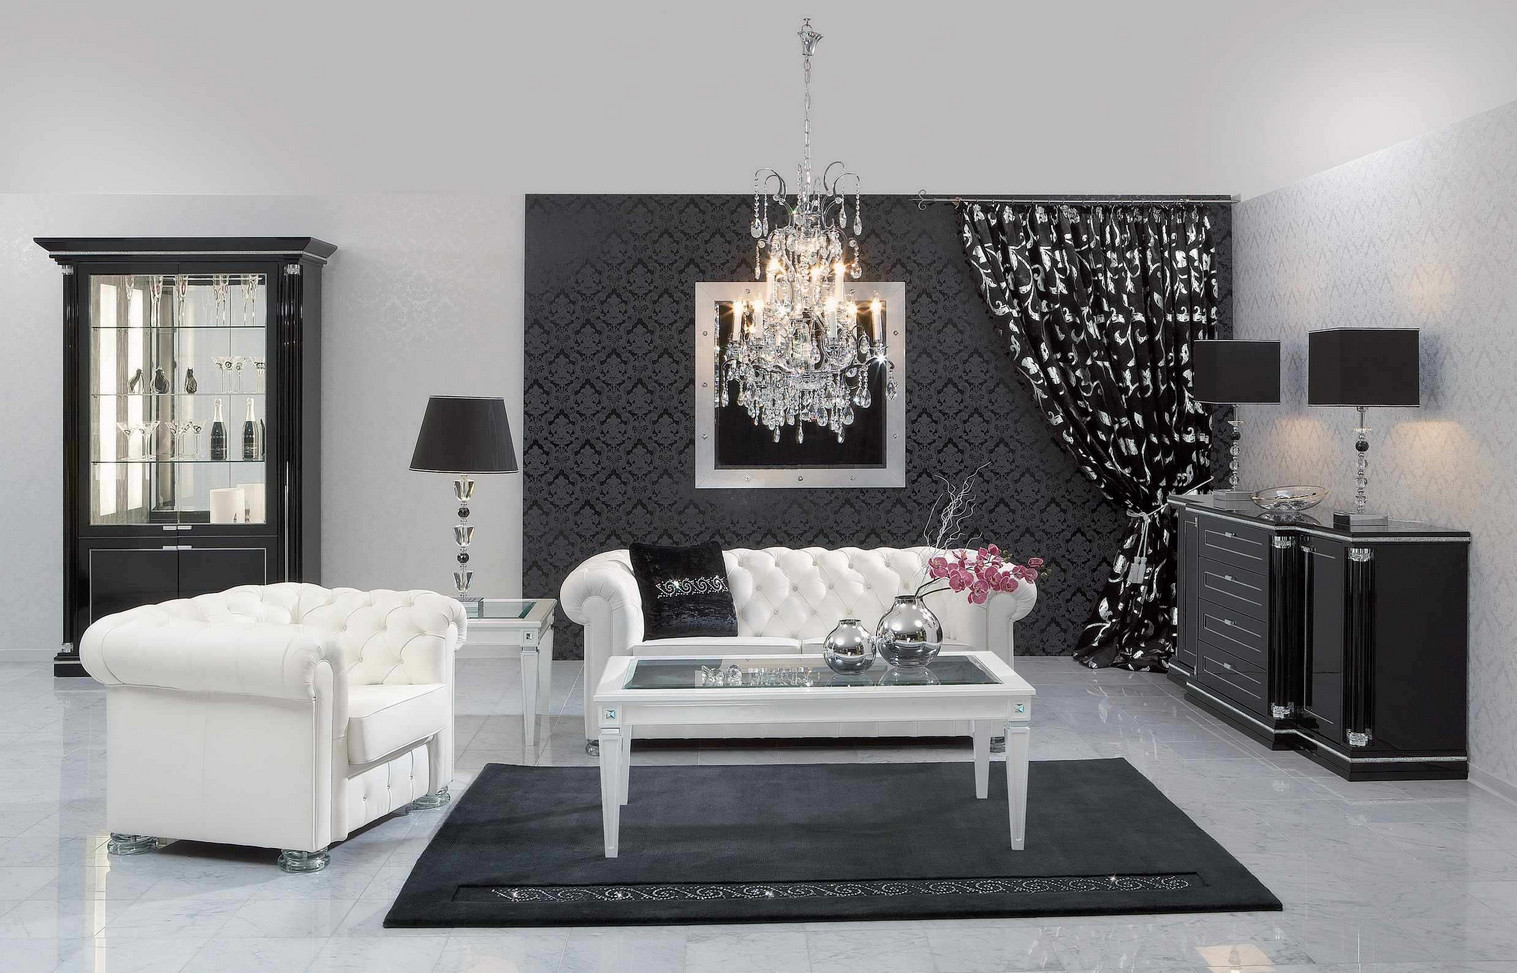 Black and White Painted Rooms7